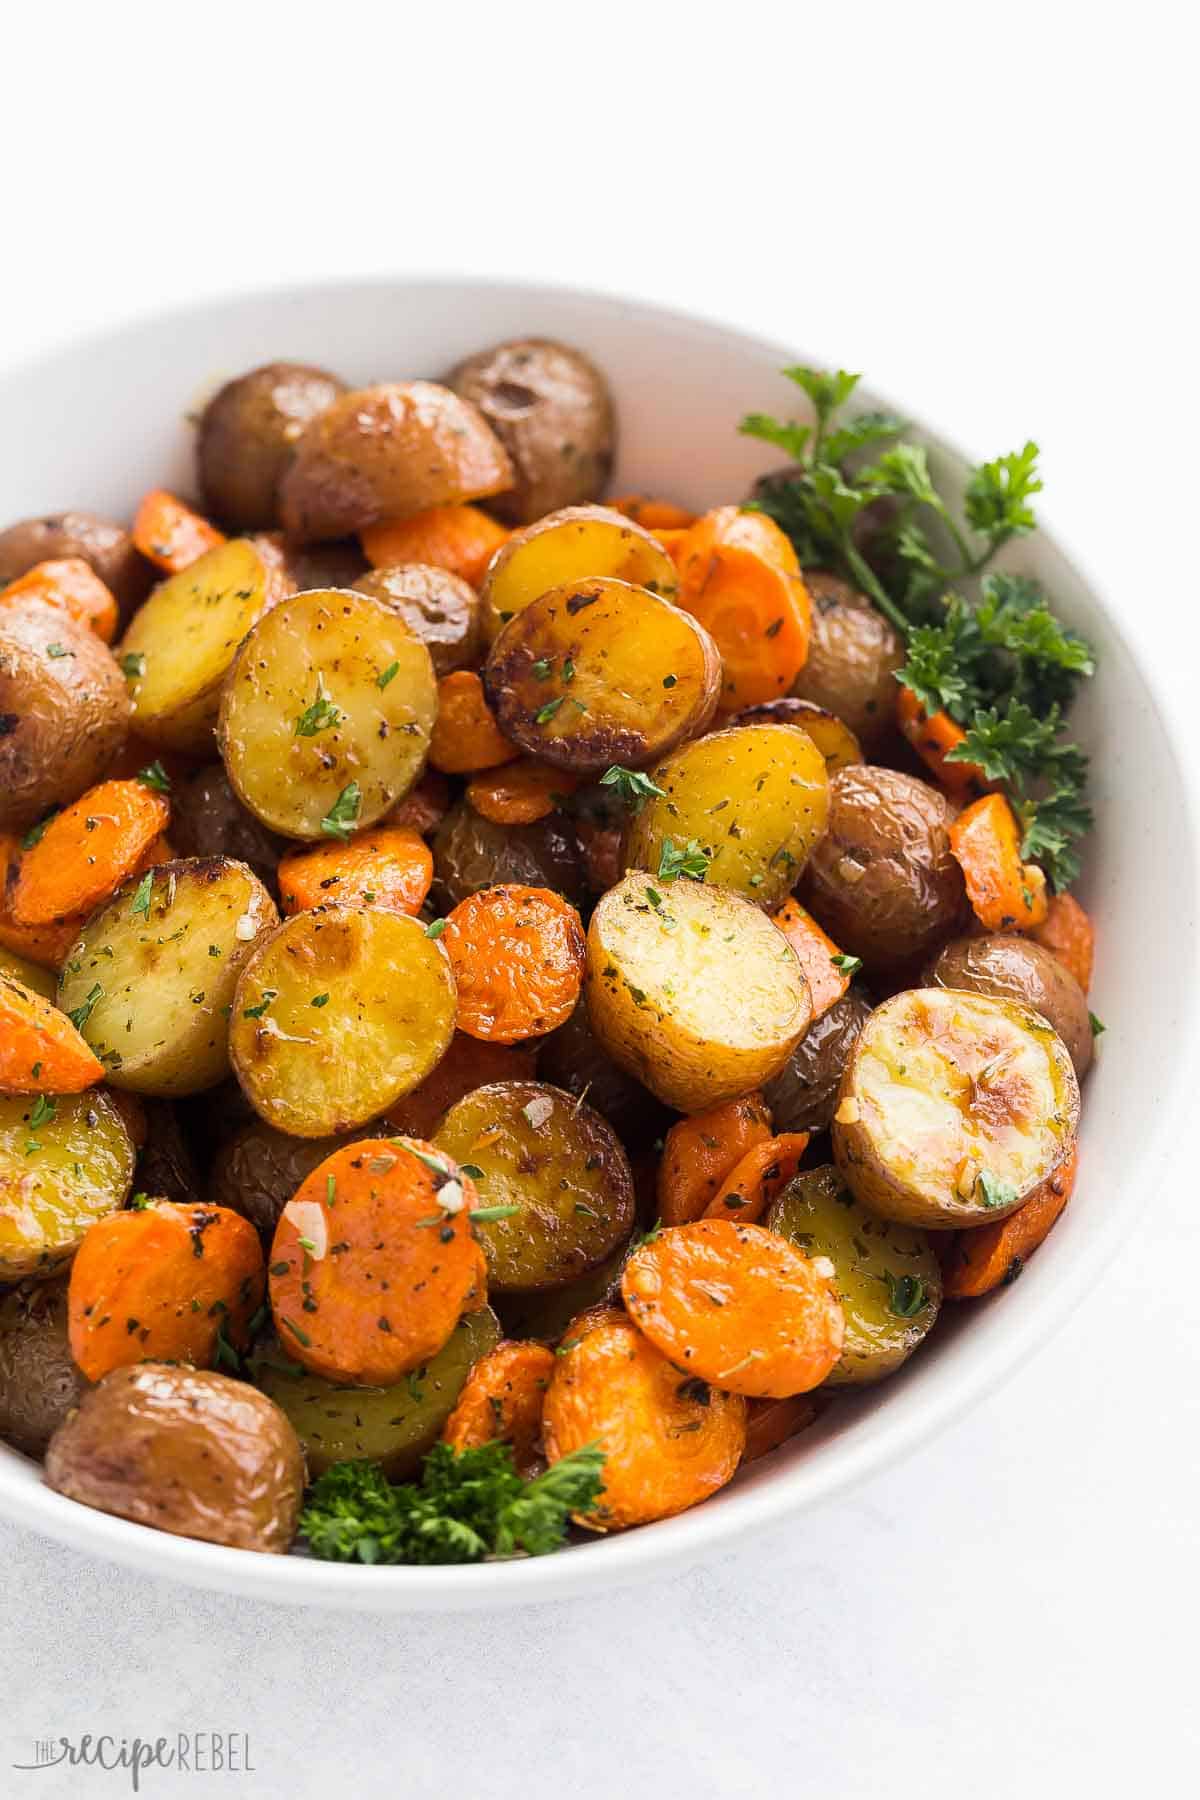 close up image of roasted carrots and potatoes in a white bowl sprinkled with parsley.